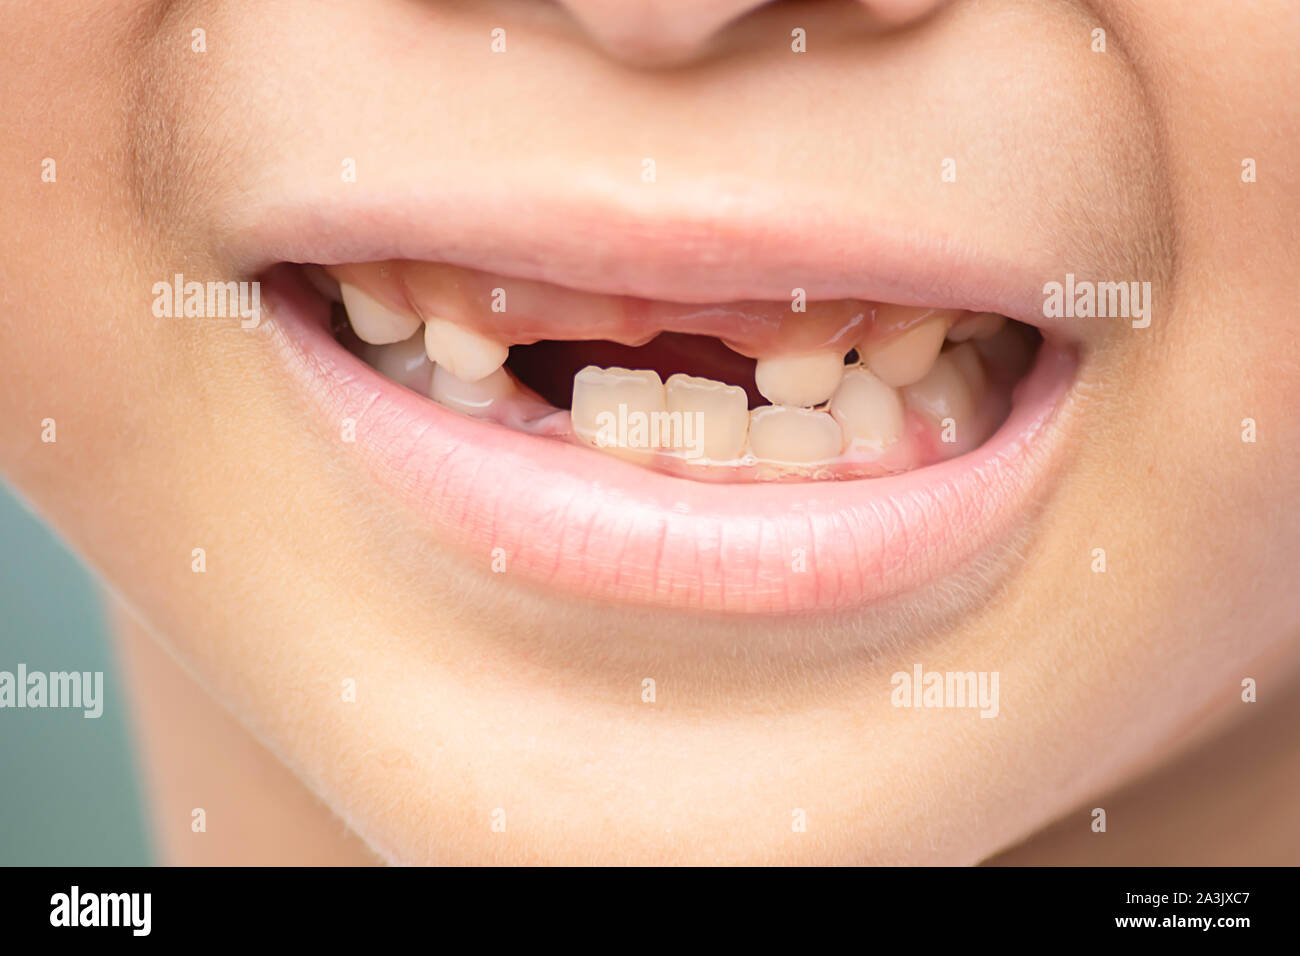 Baby teeth are just dropped in the mouth. Stock Photo